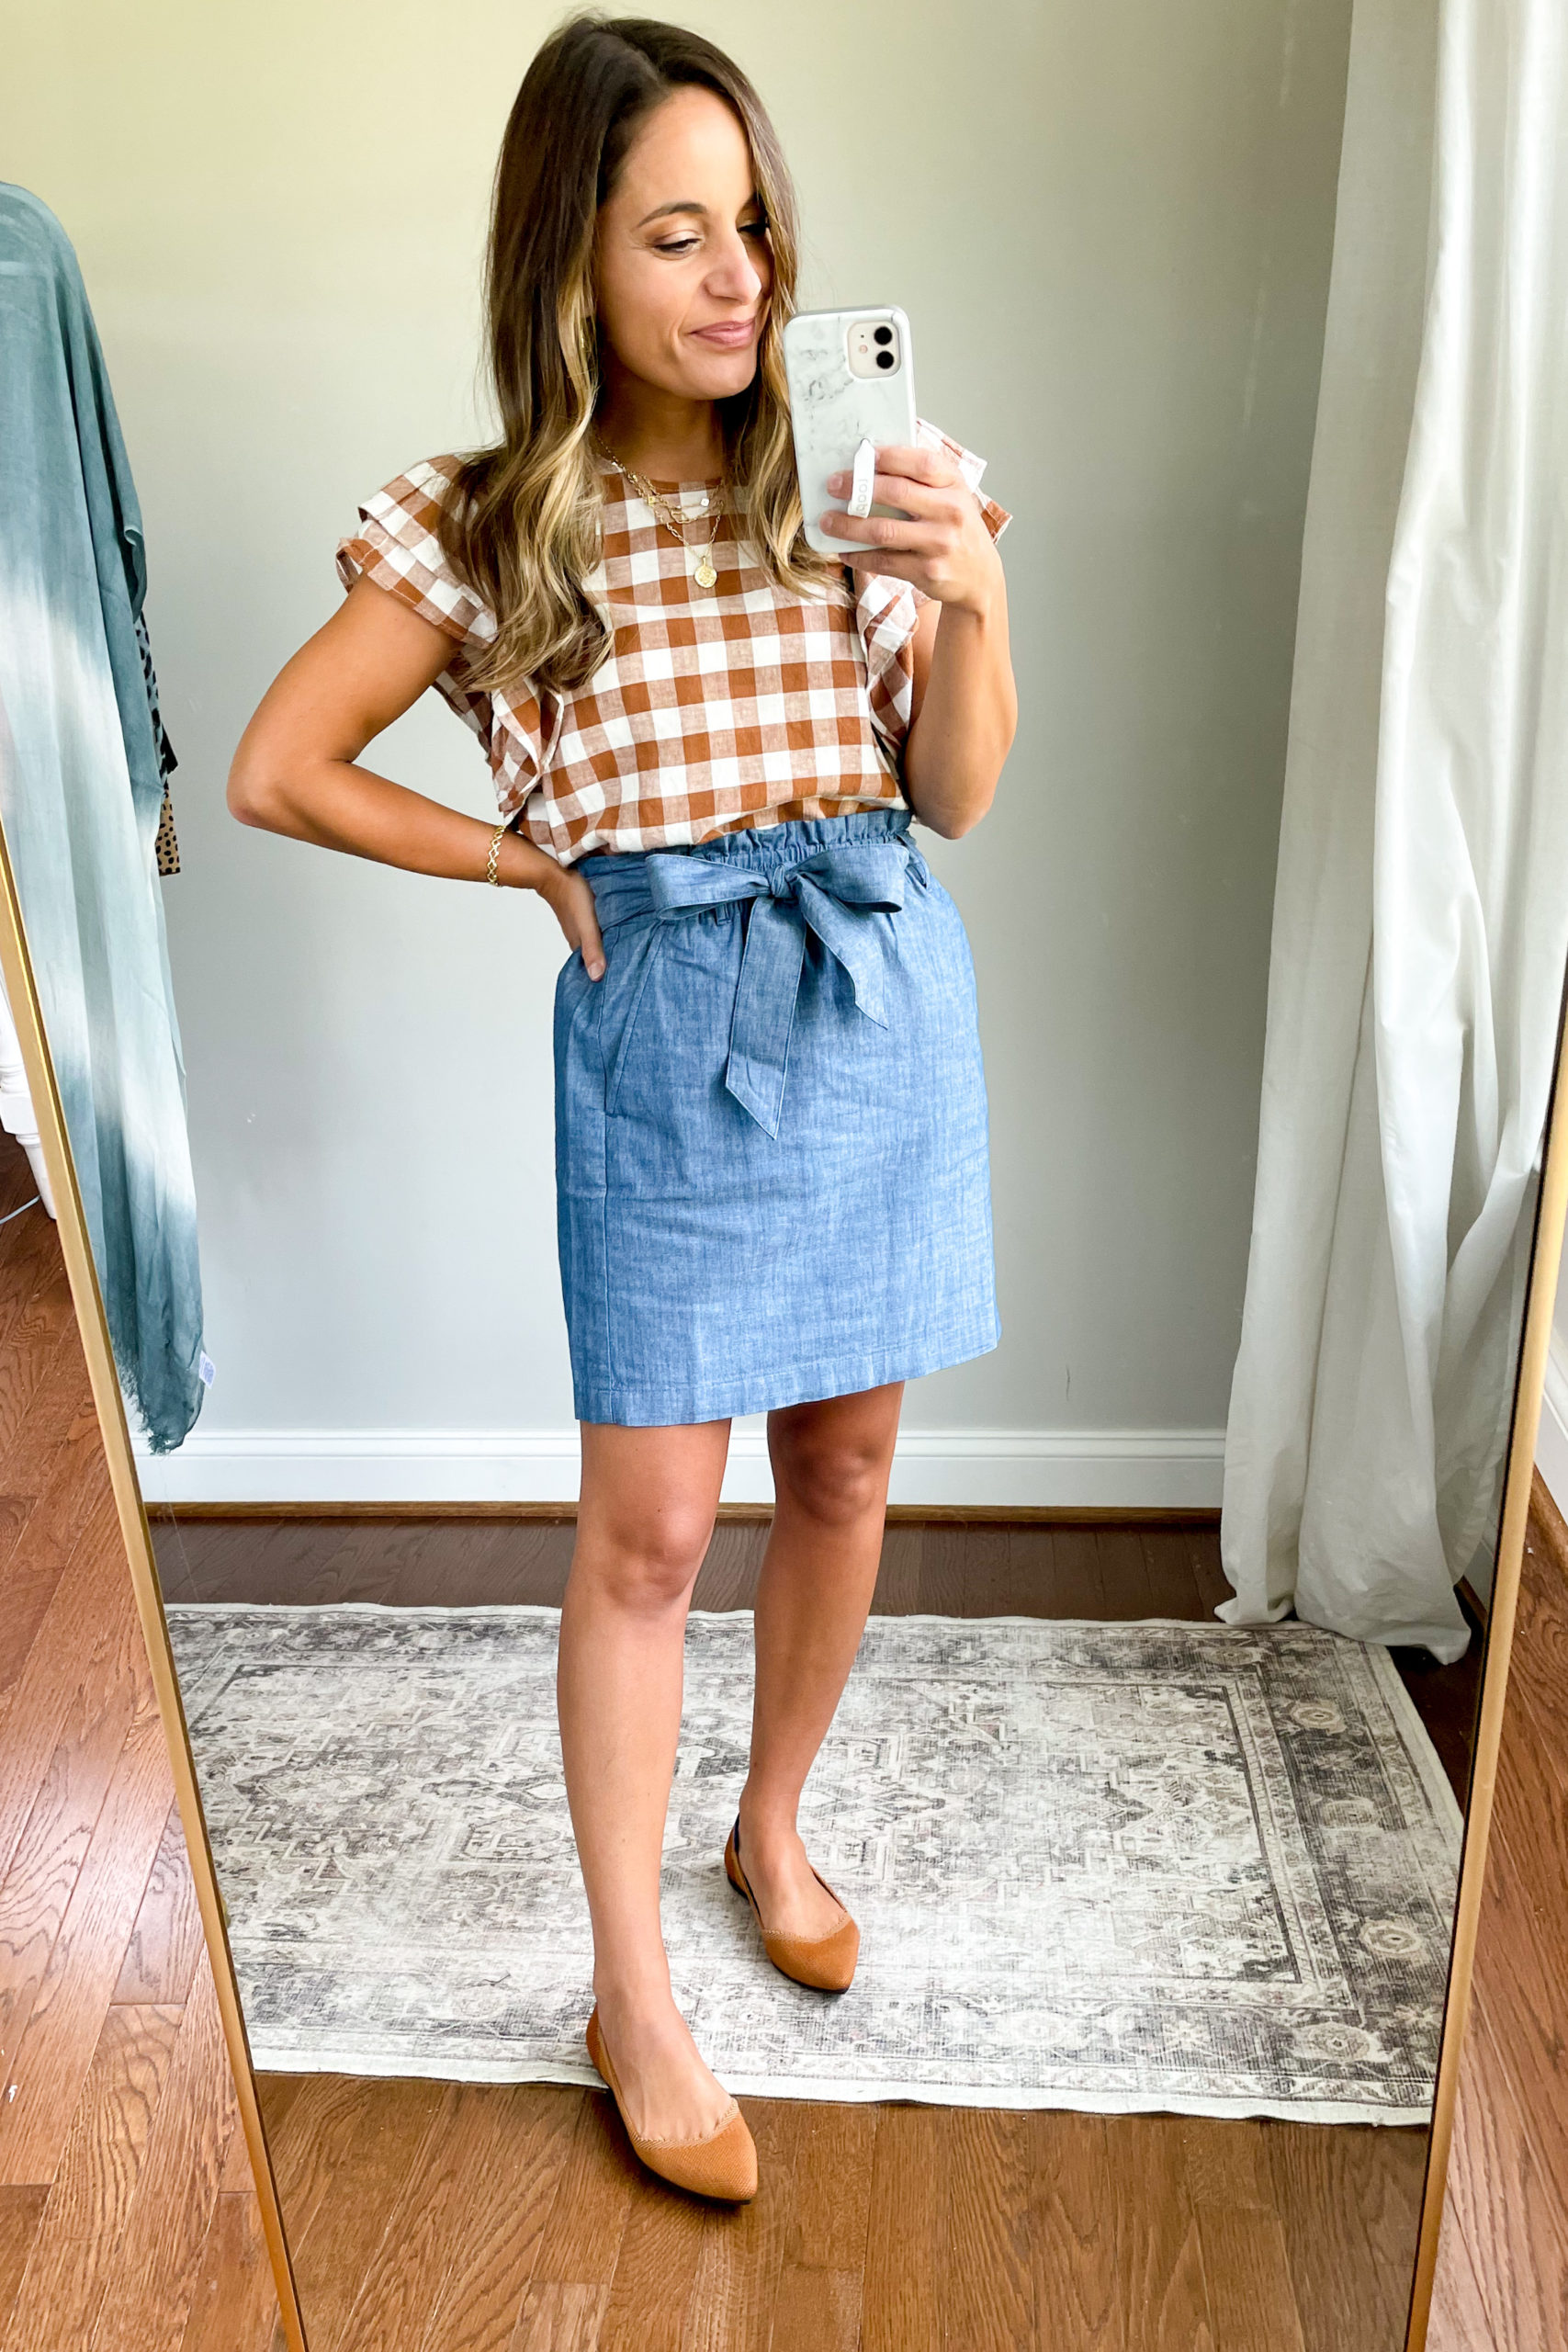 Fall transitional outfit via pumps and push-ups blog | petite fashion | petite style | petite blogger | paper-bag skirt outfits 